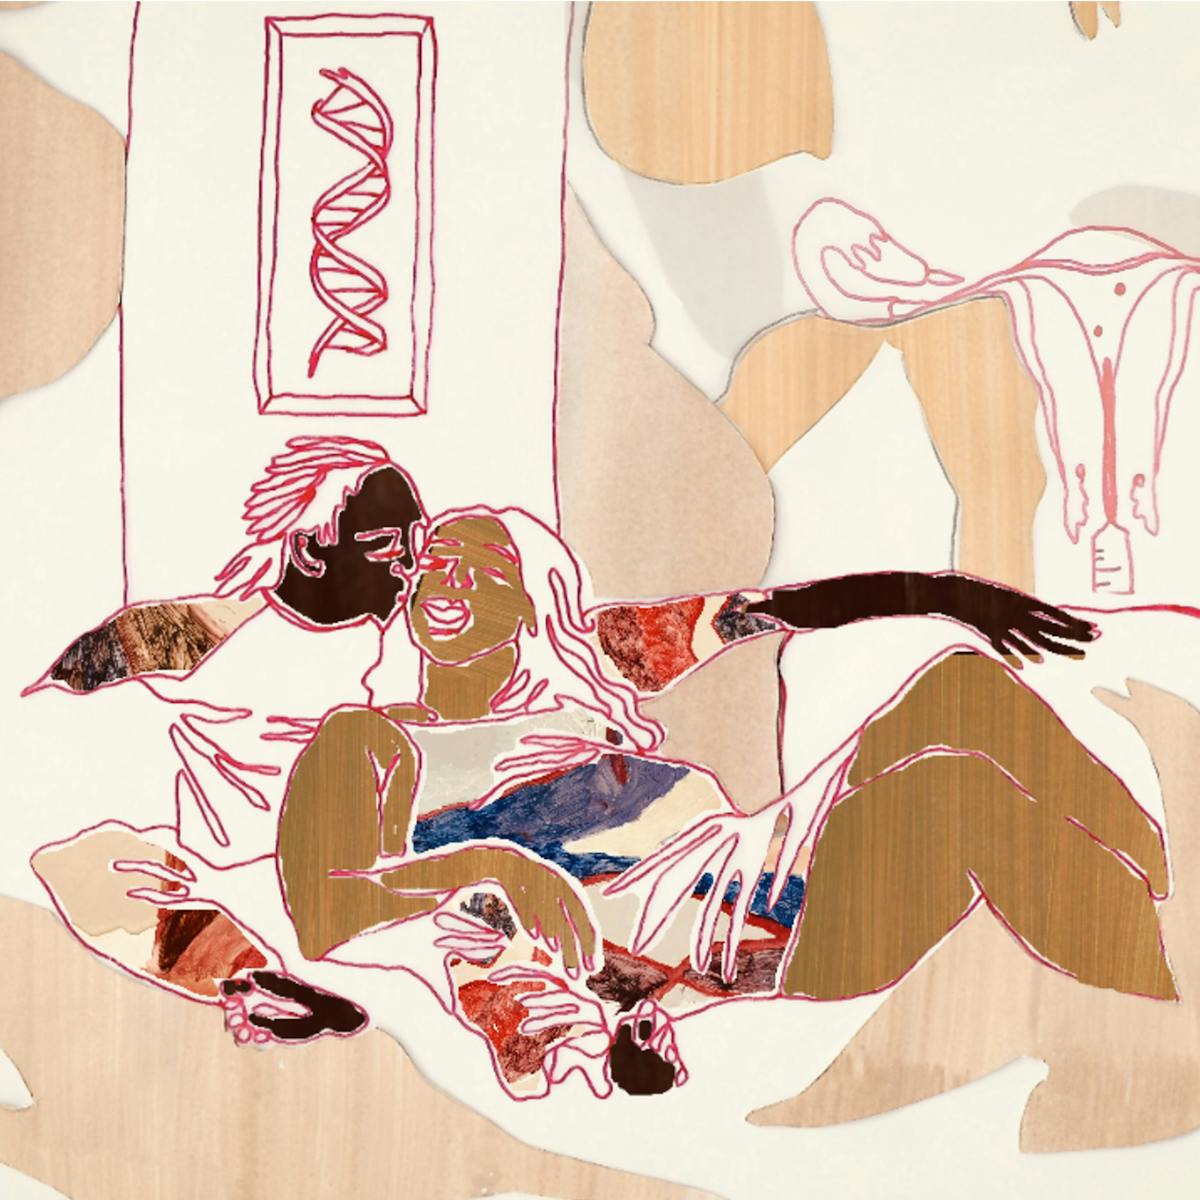 Digital artwork made up of collage elements, line drawing and textured patterns.The artwork depicts 2 women reclined in each others arms as if on a sofa. The woman behind is kissing the other woman on the cheek. Each woman has a different skin tone. Behind the reclining couple as if on the walls of the living room is a framed picture of the DNA helix and a diagram of the female reproductive organ with syringes as if in a fertility procedure. The tones of the artwork are creams, rusts, browns and reds.